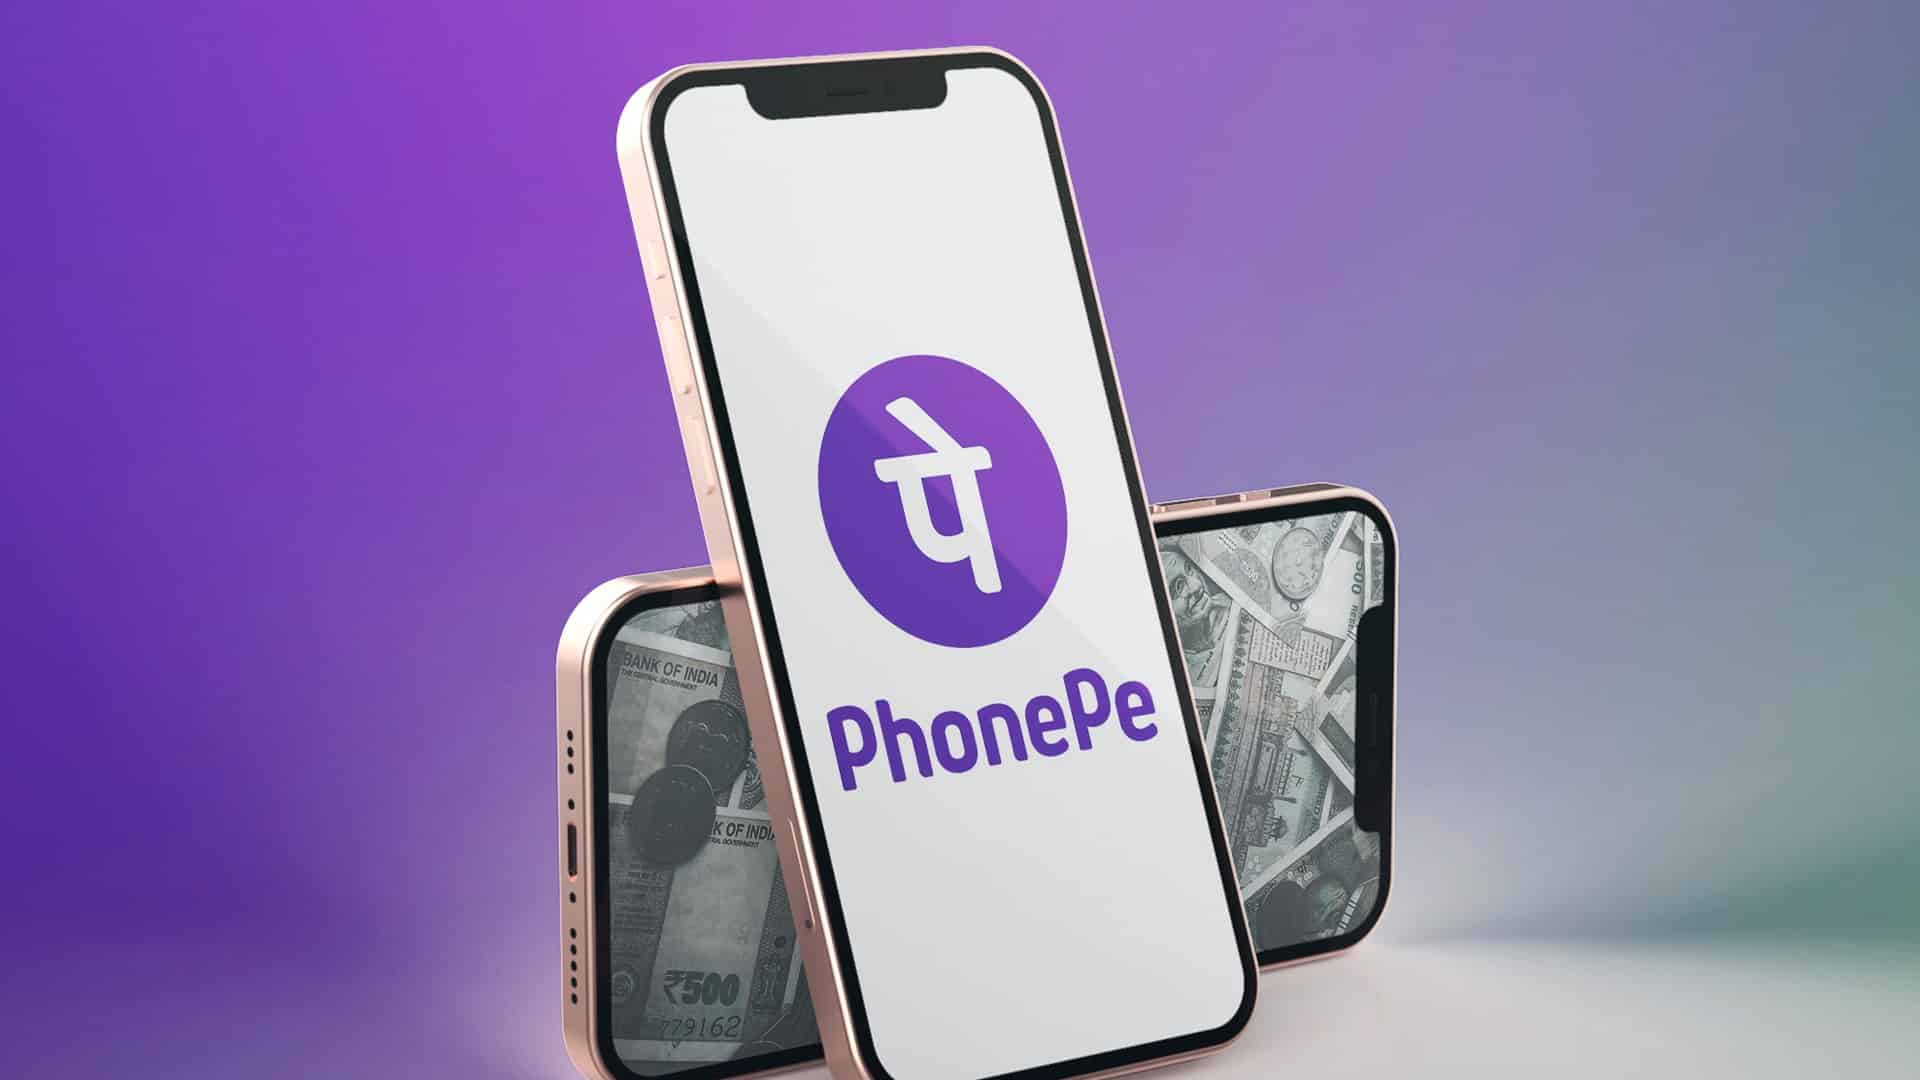 PhonePe raises $200 mn in additional funding from Walmart